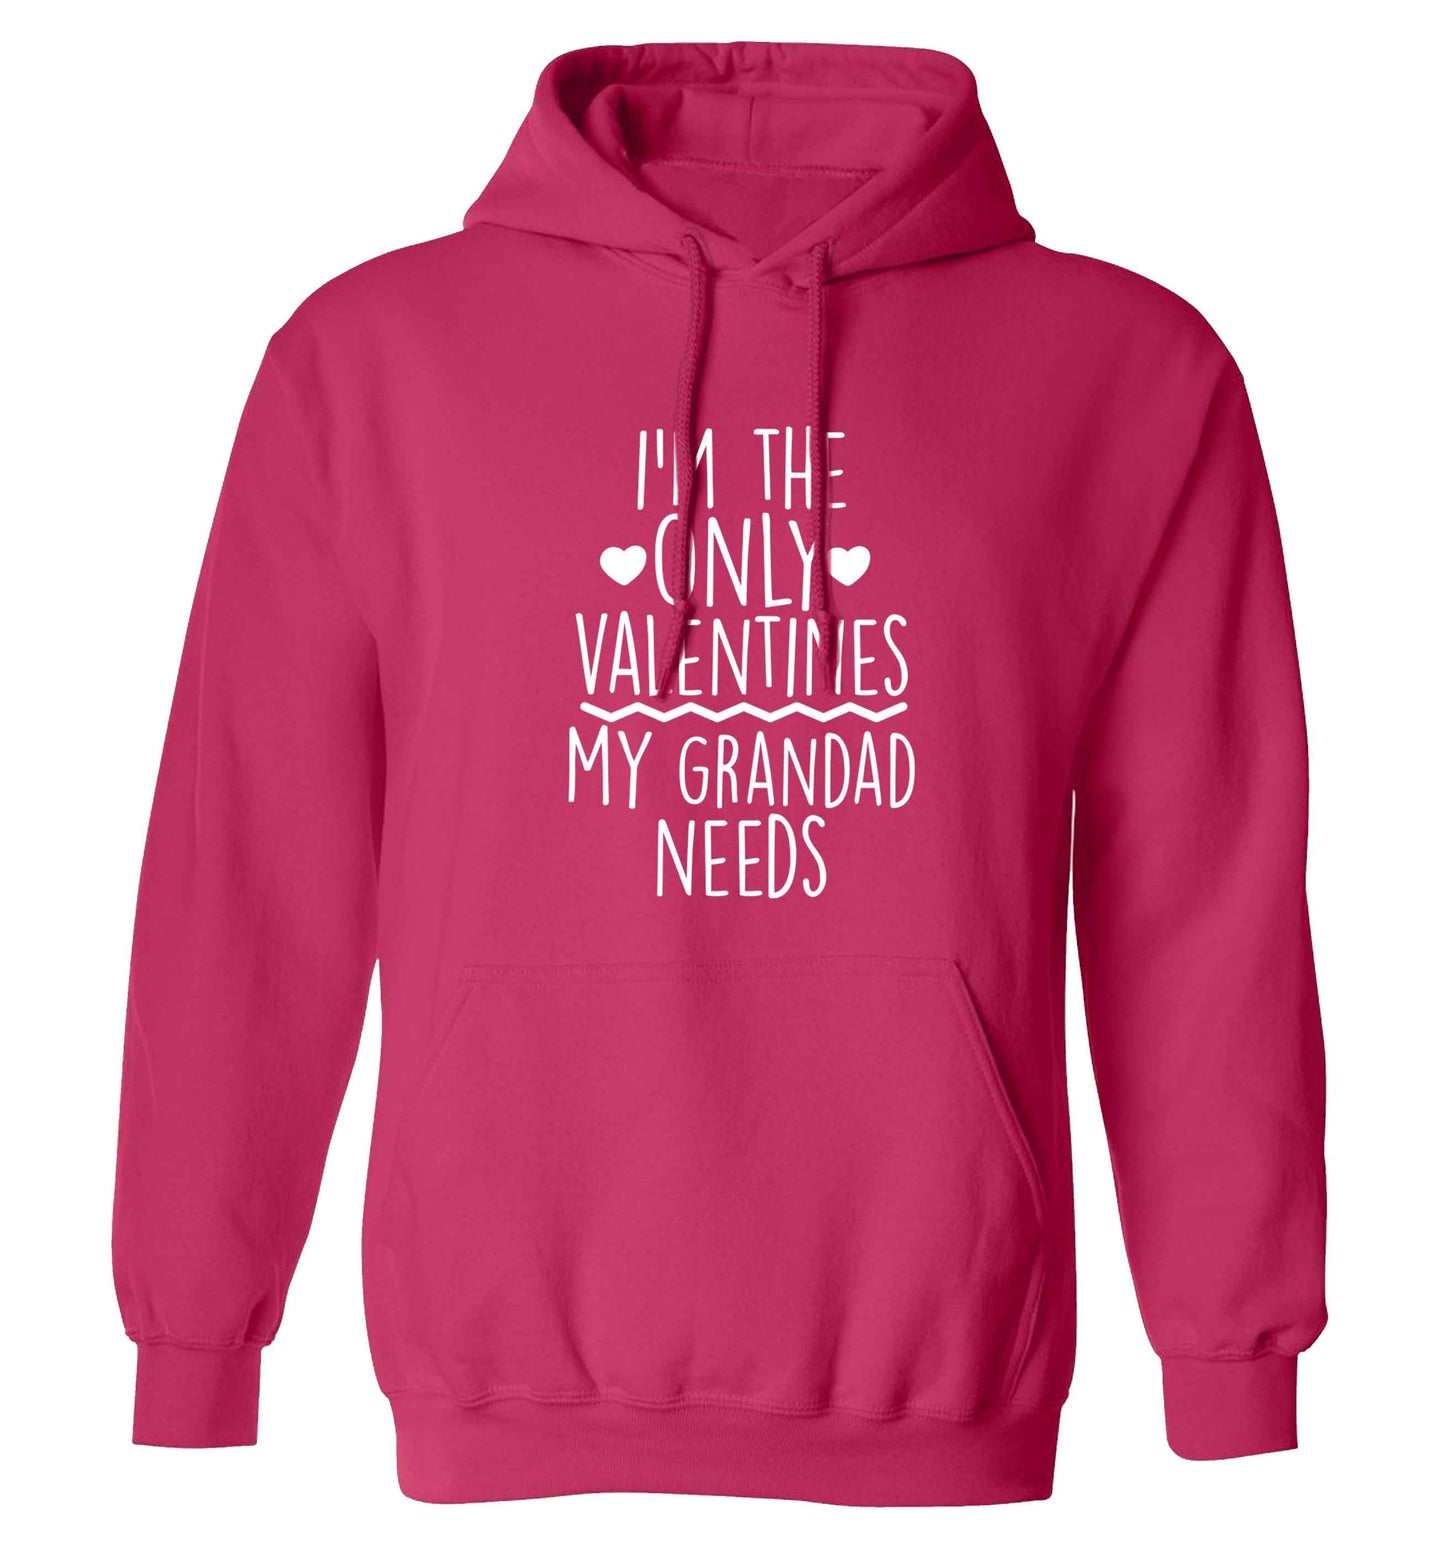 I'm the only valentines my grandad needs adults unisex pink hoodie 2XL